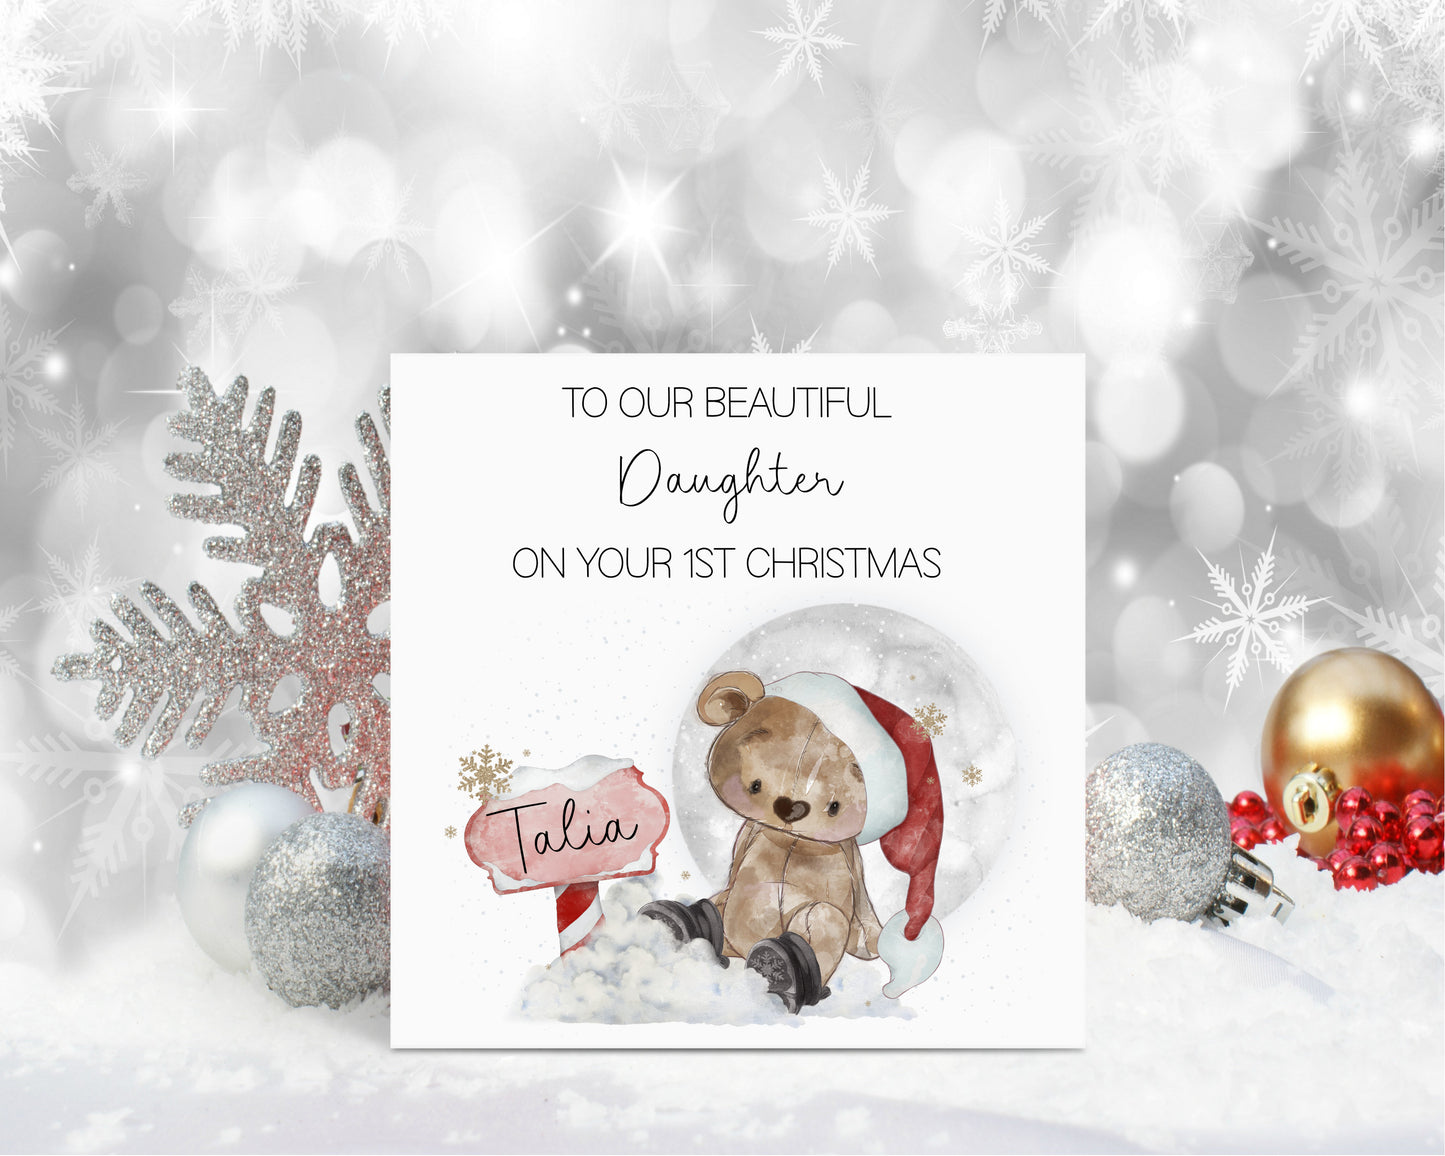 Goddaughter 1st Christmas Card, Christmas Card For Goddaughter, Baby's 1st Xmas Card, Personalised Christmas Card, Christmas In July